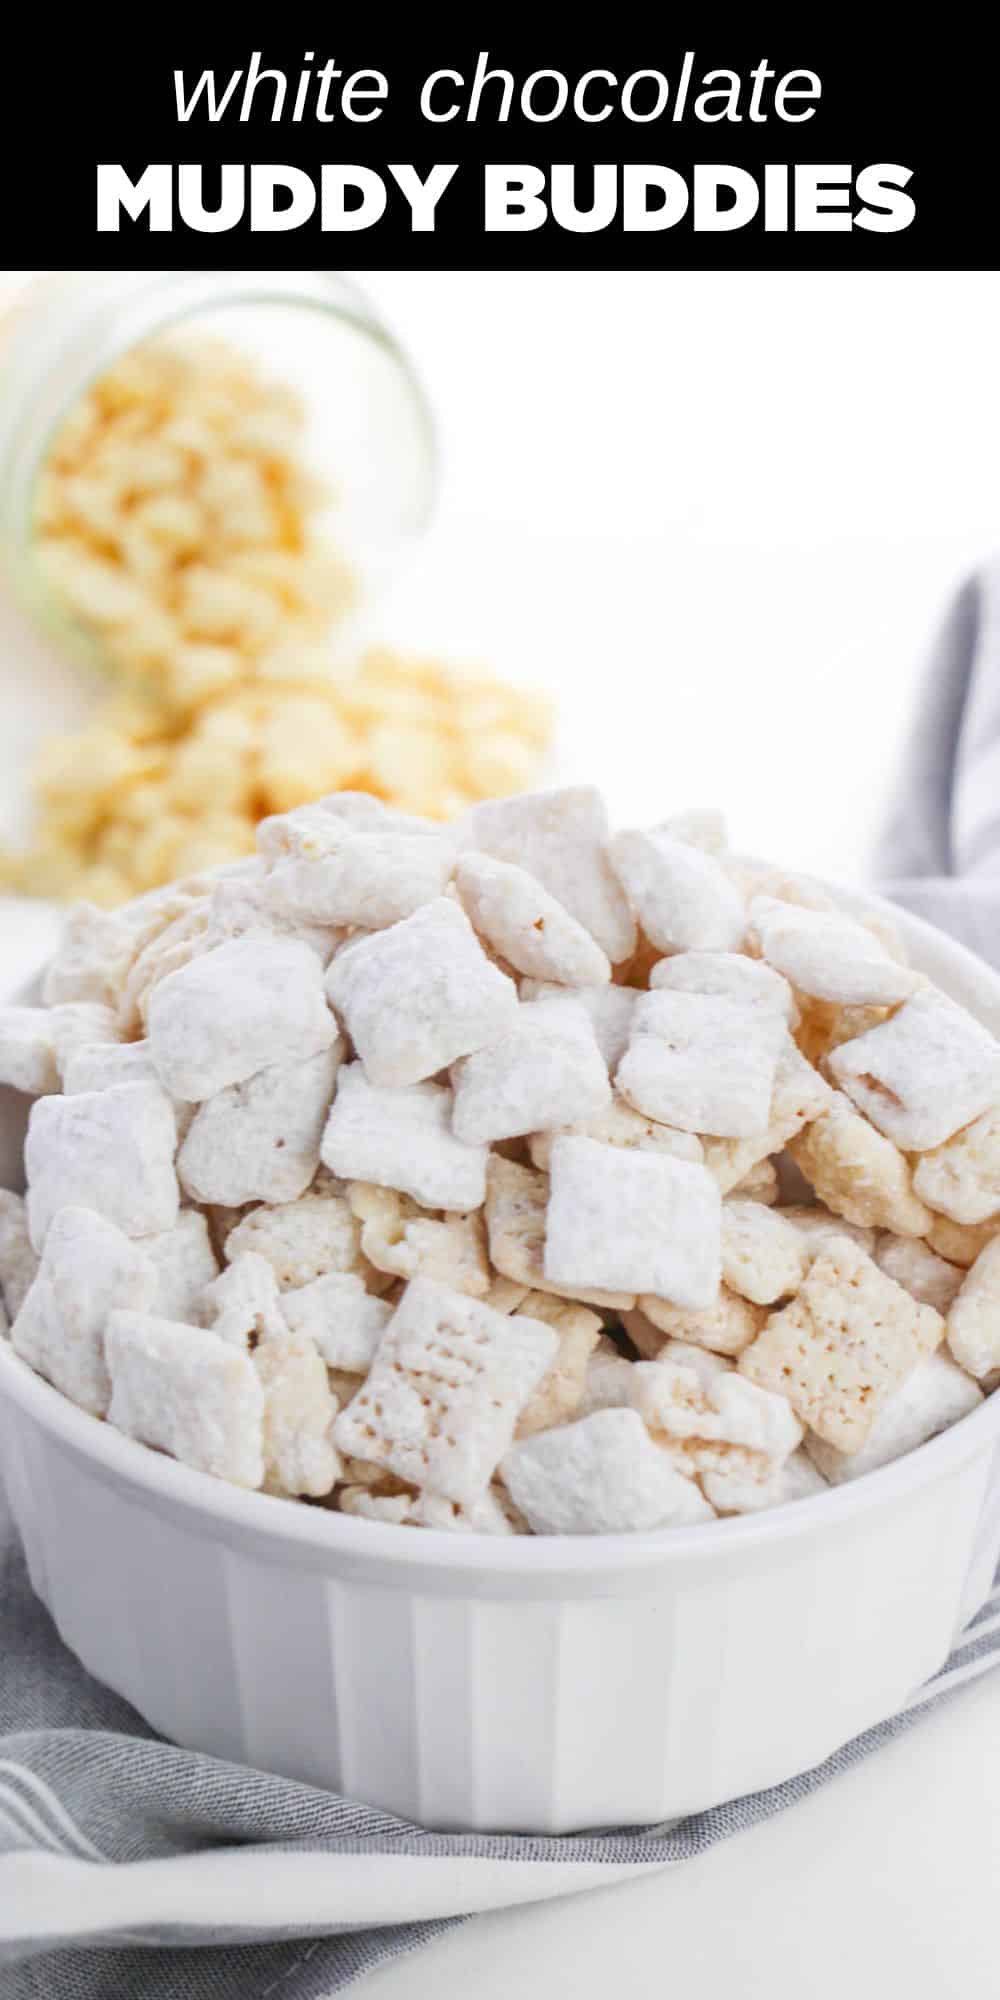 These white chocolate muddy buddies are an indulgent and delicious treat that you won’t want to put down. Perfect for parties, this crowd-pleasing sweet snack mix is quick to prepare and even quicker to disappear.